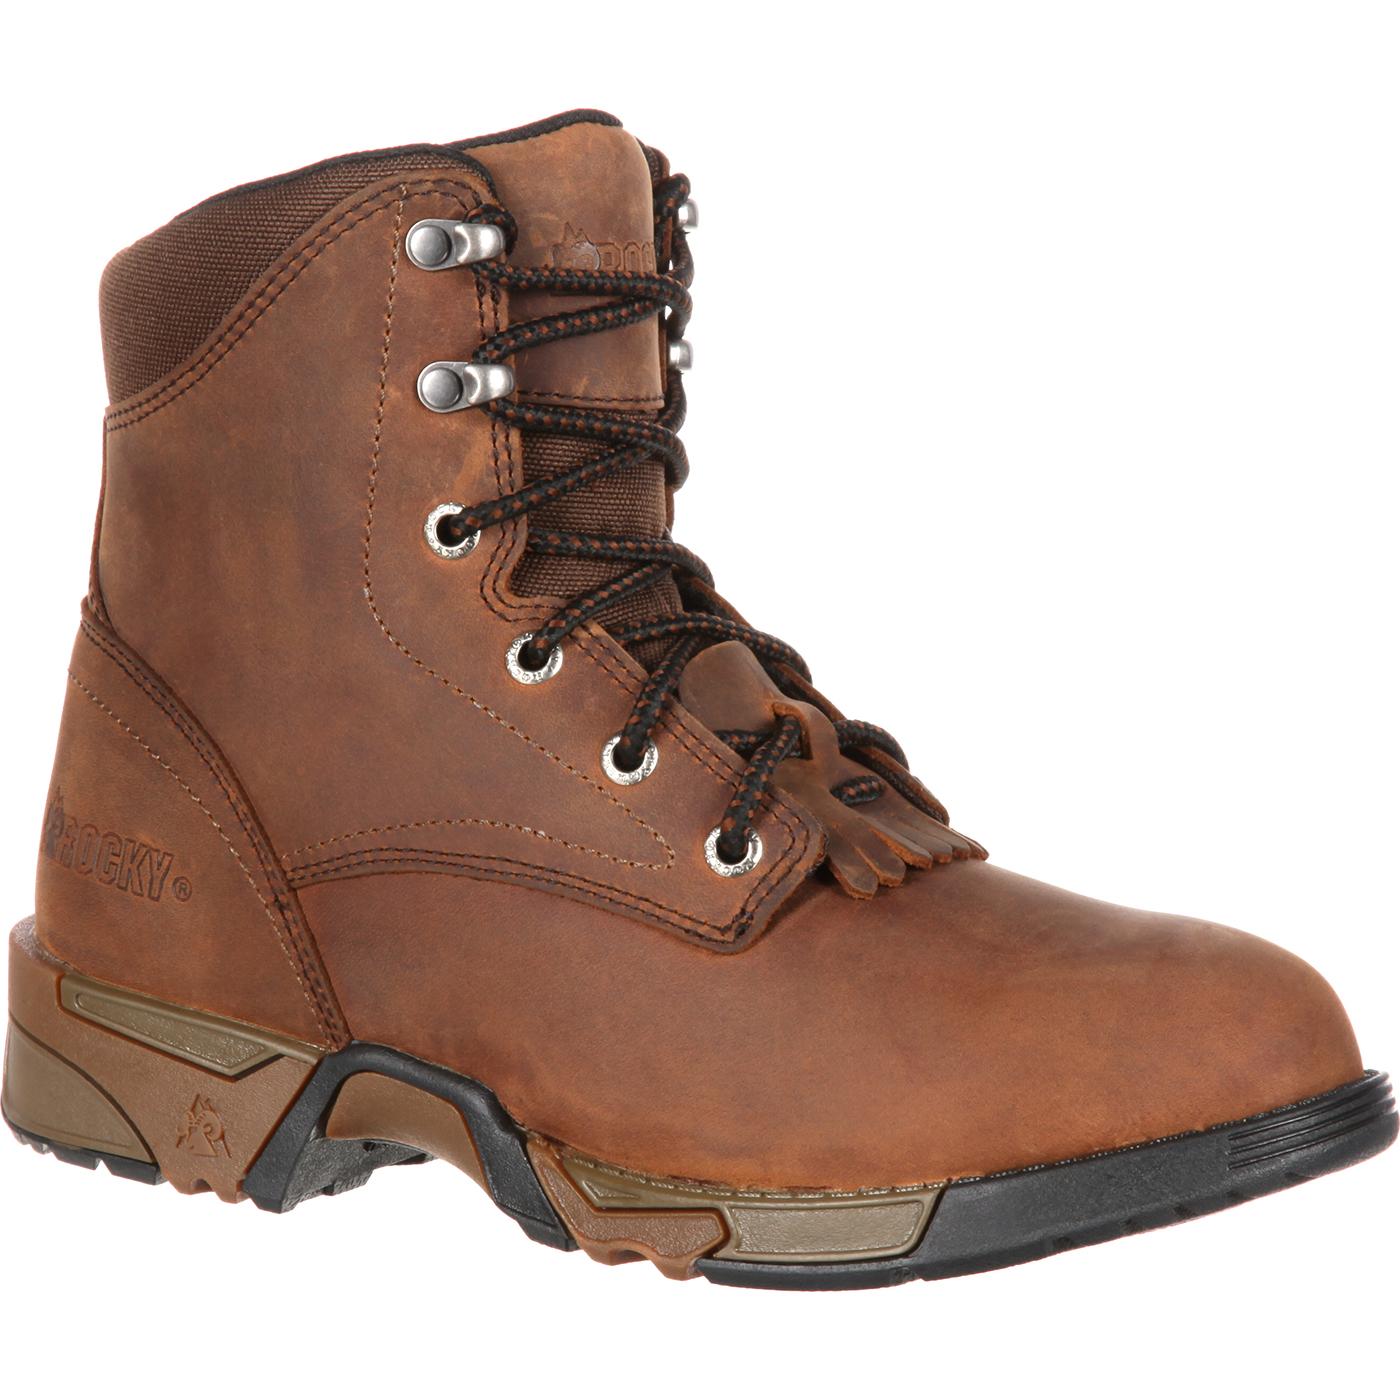 Women's Brown Lace-up Work Boot, Rocky Aztec style RKK0137